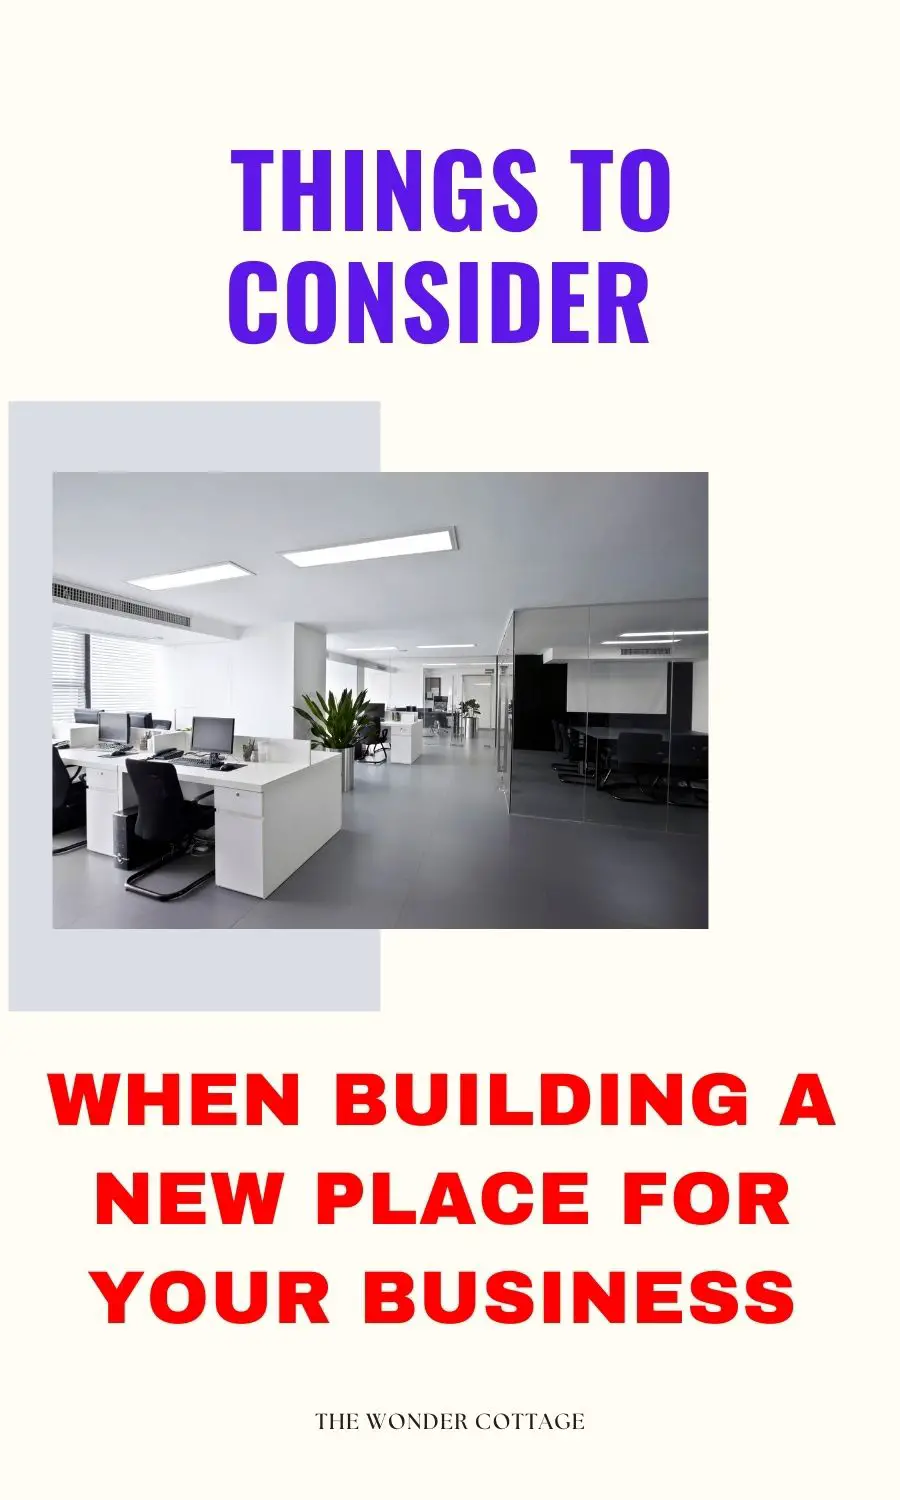 Things To Consider When Building A New Place For Your Business